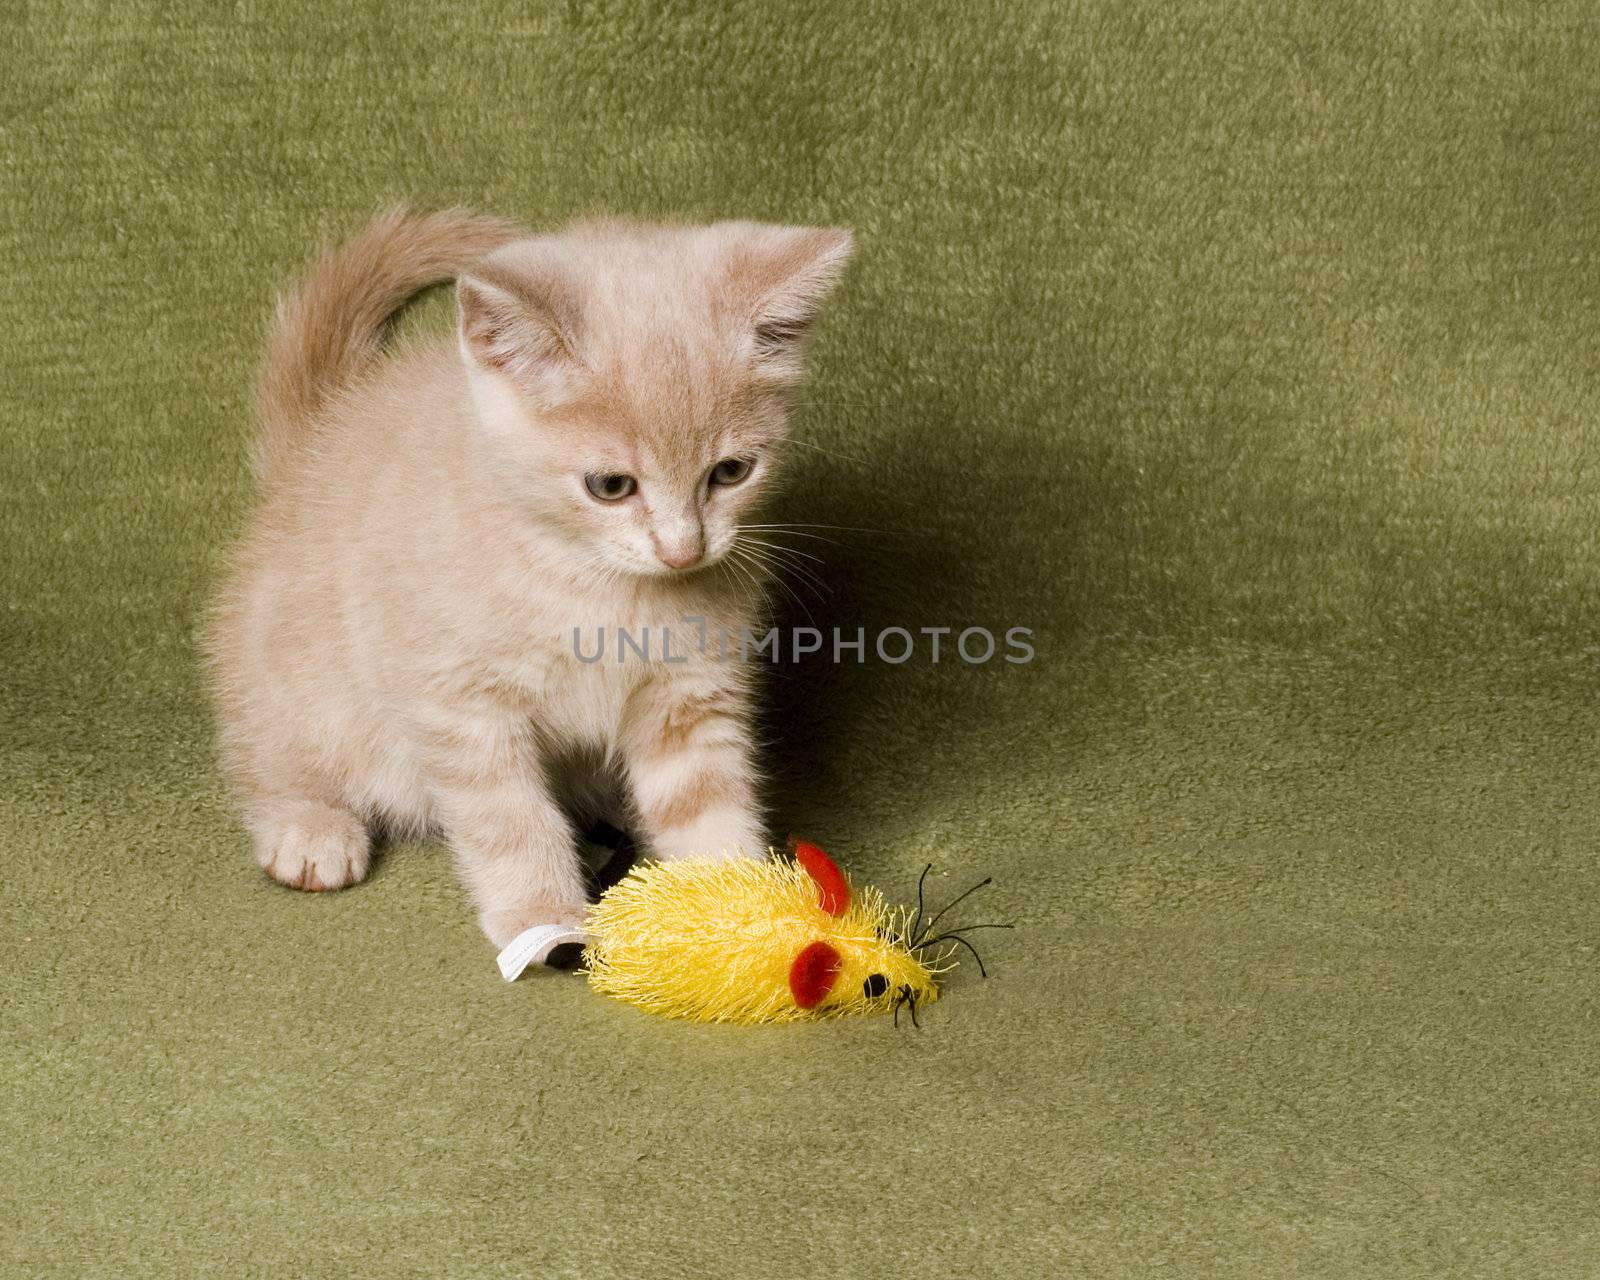 Cute kitten playing with his mouse toy